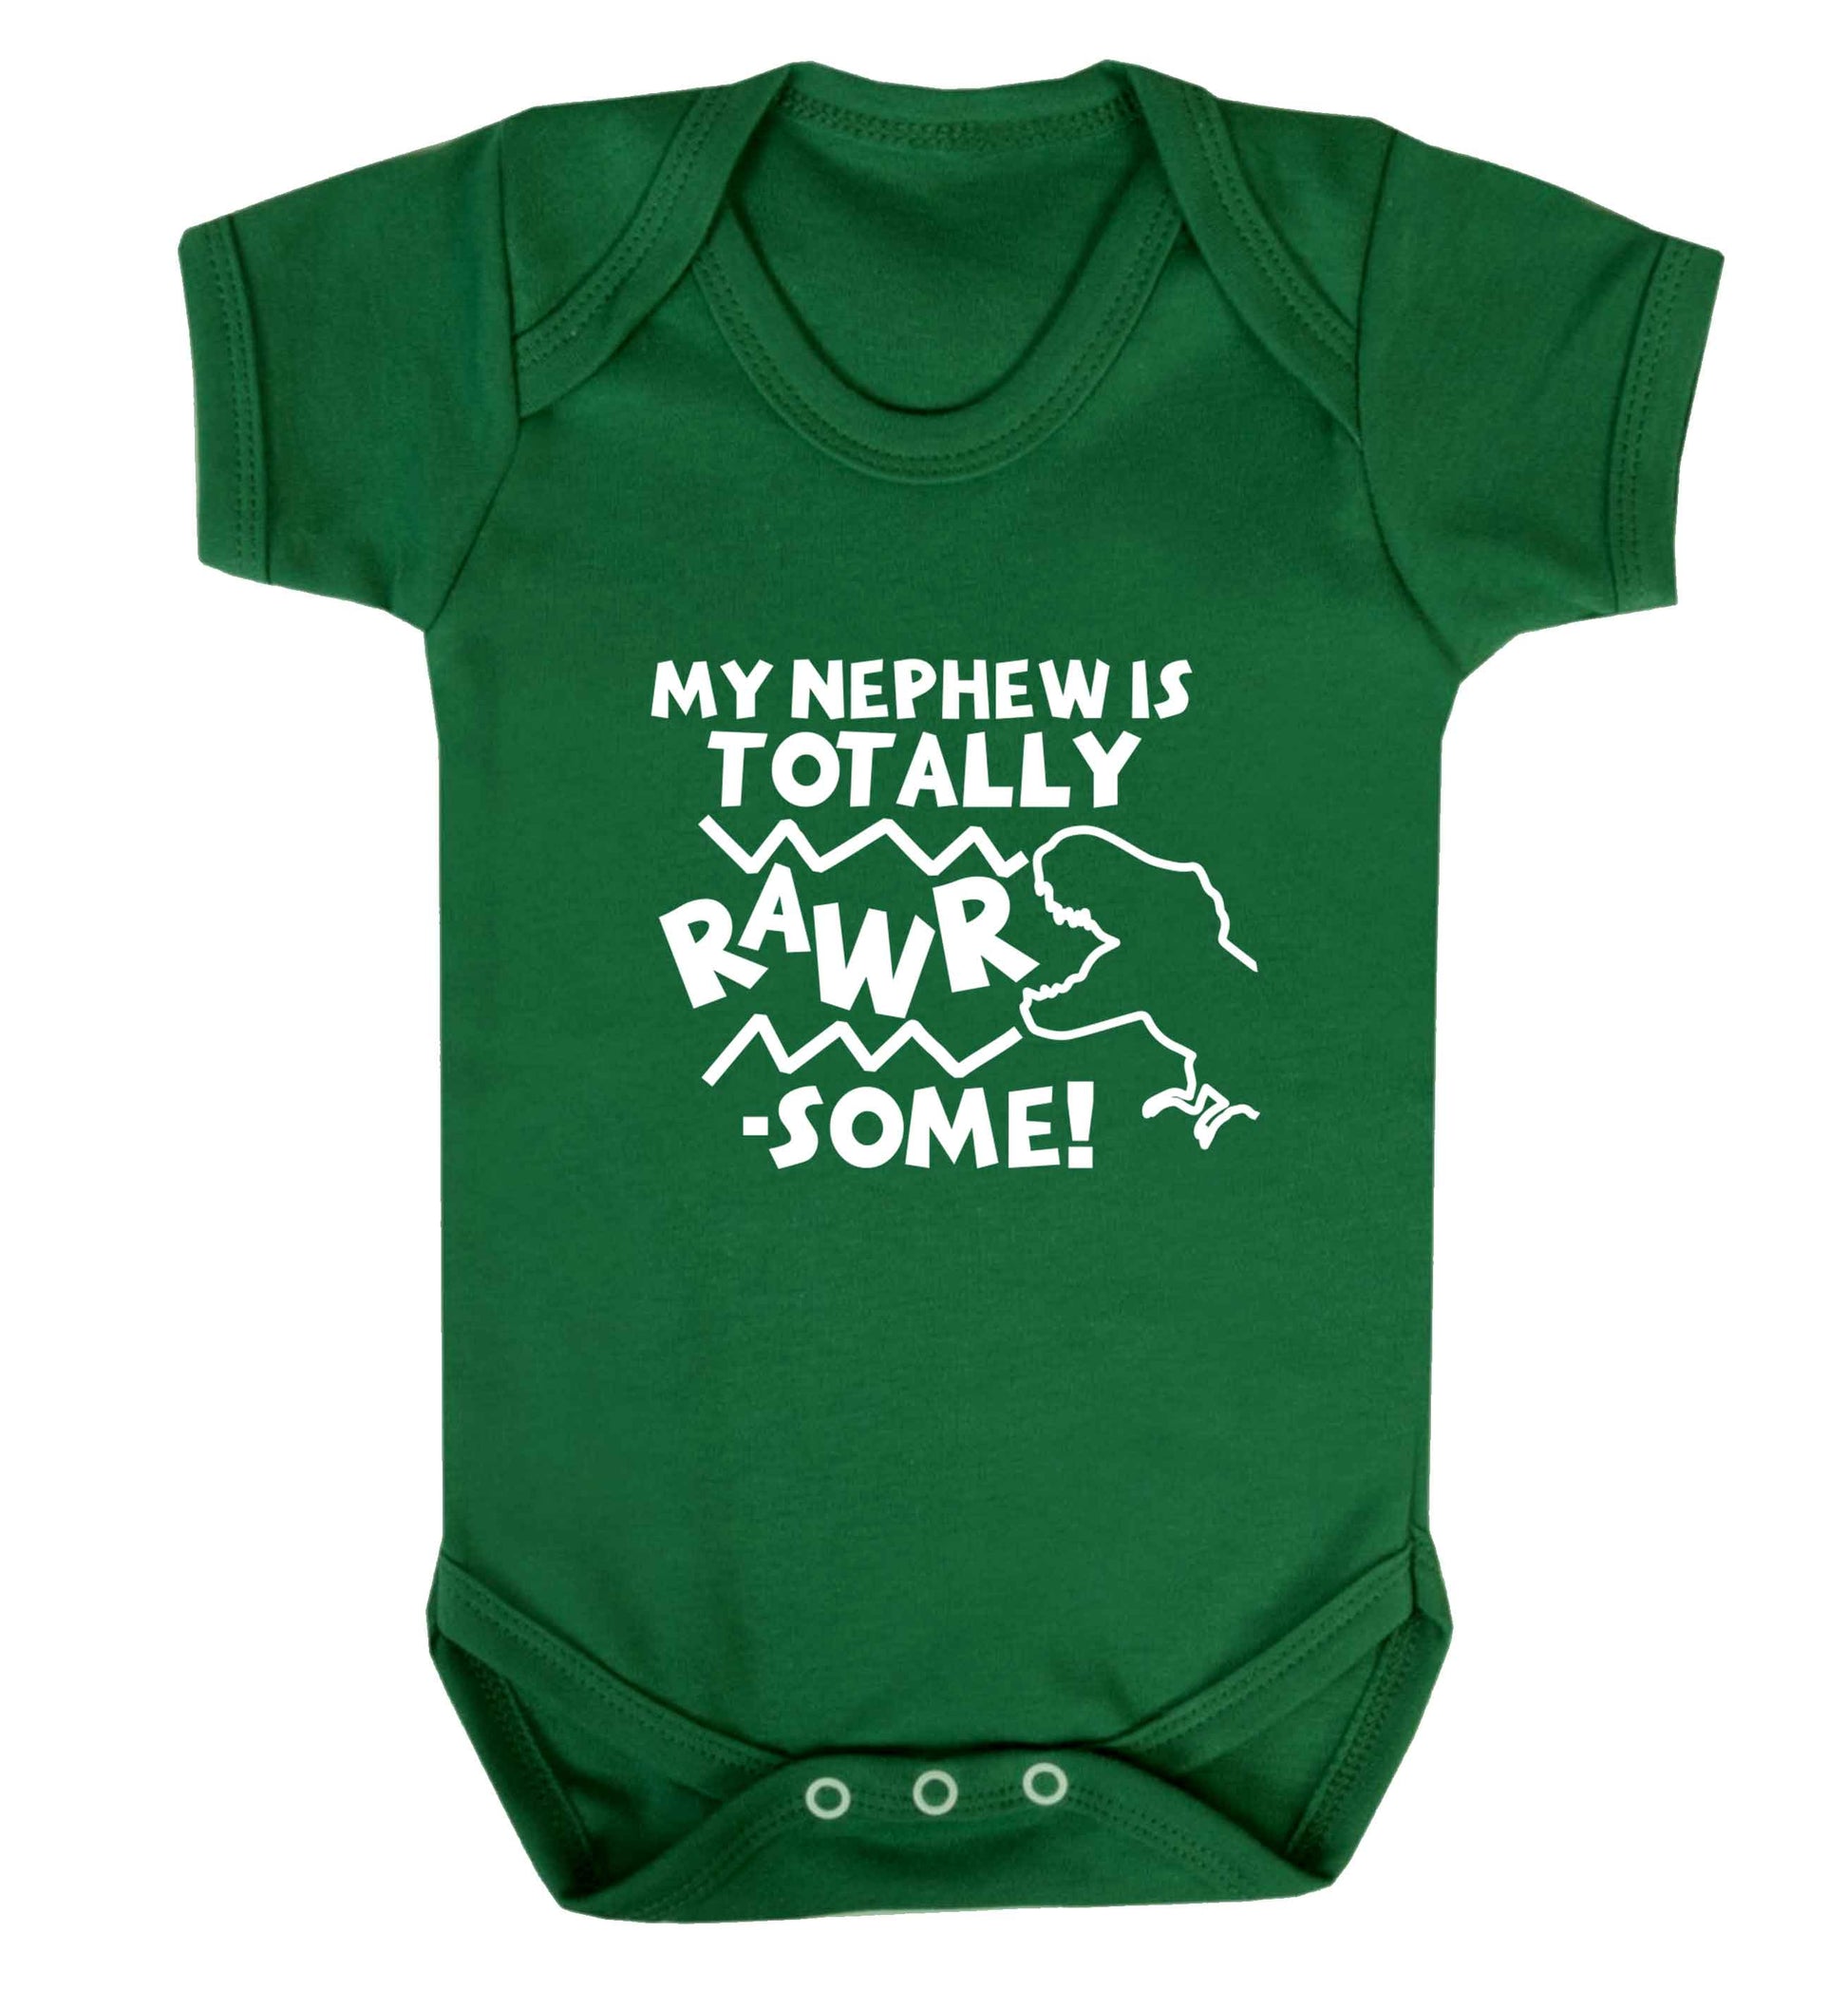 My nephew is totally rawrsome baby vest green 18-24 months